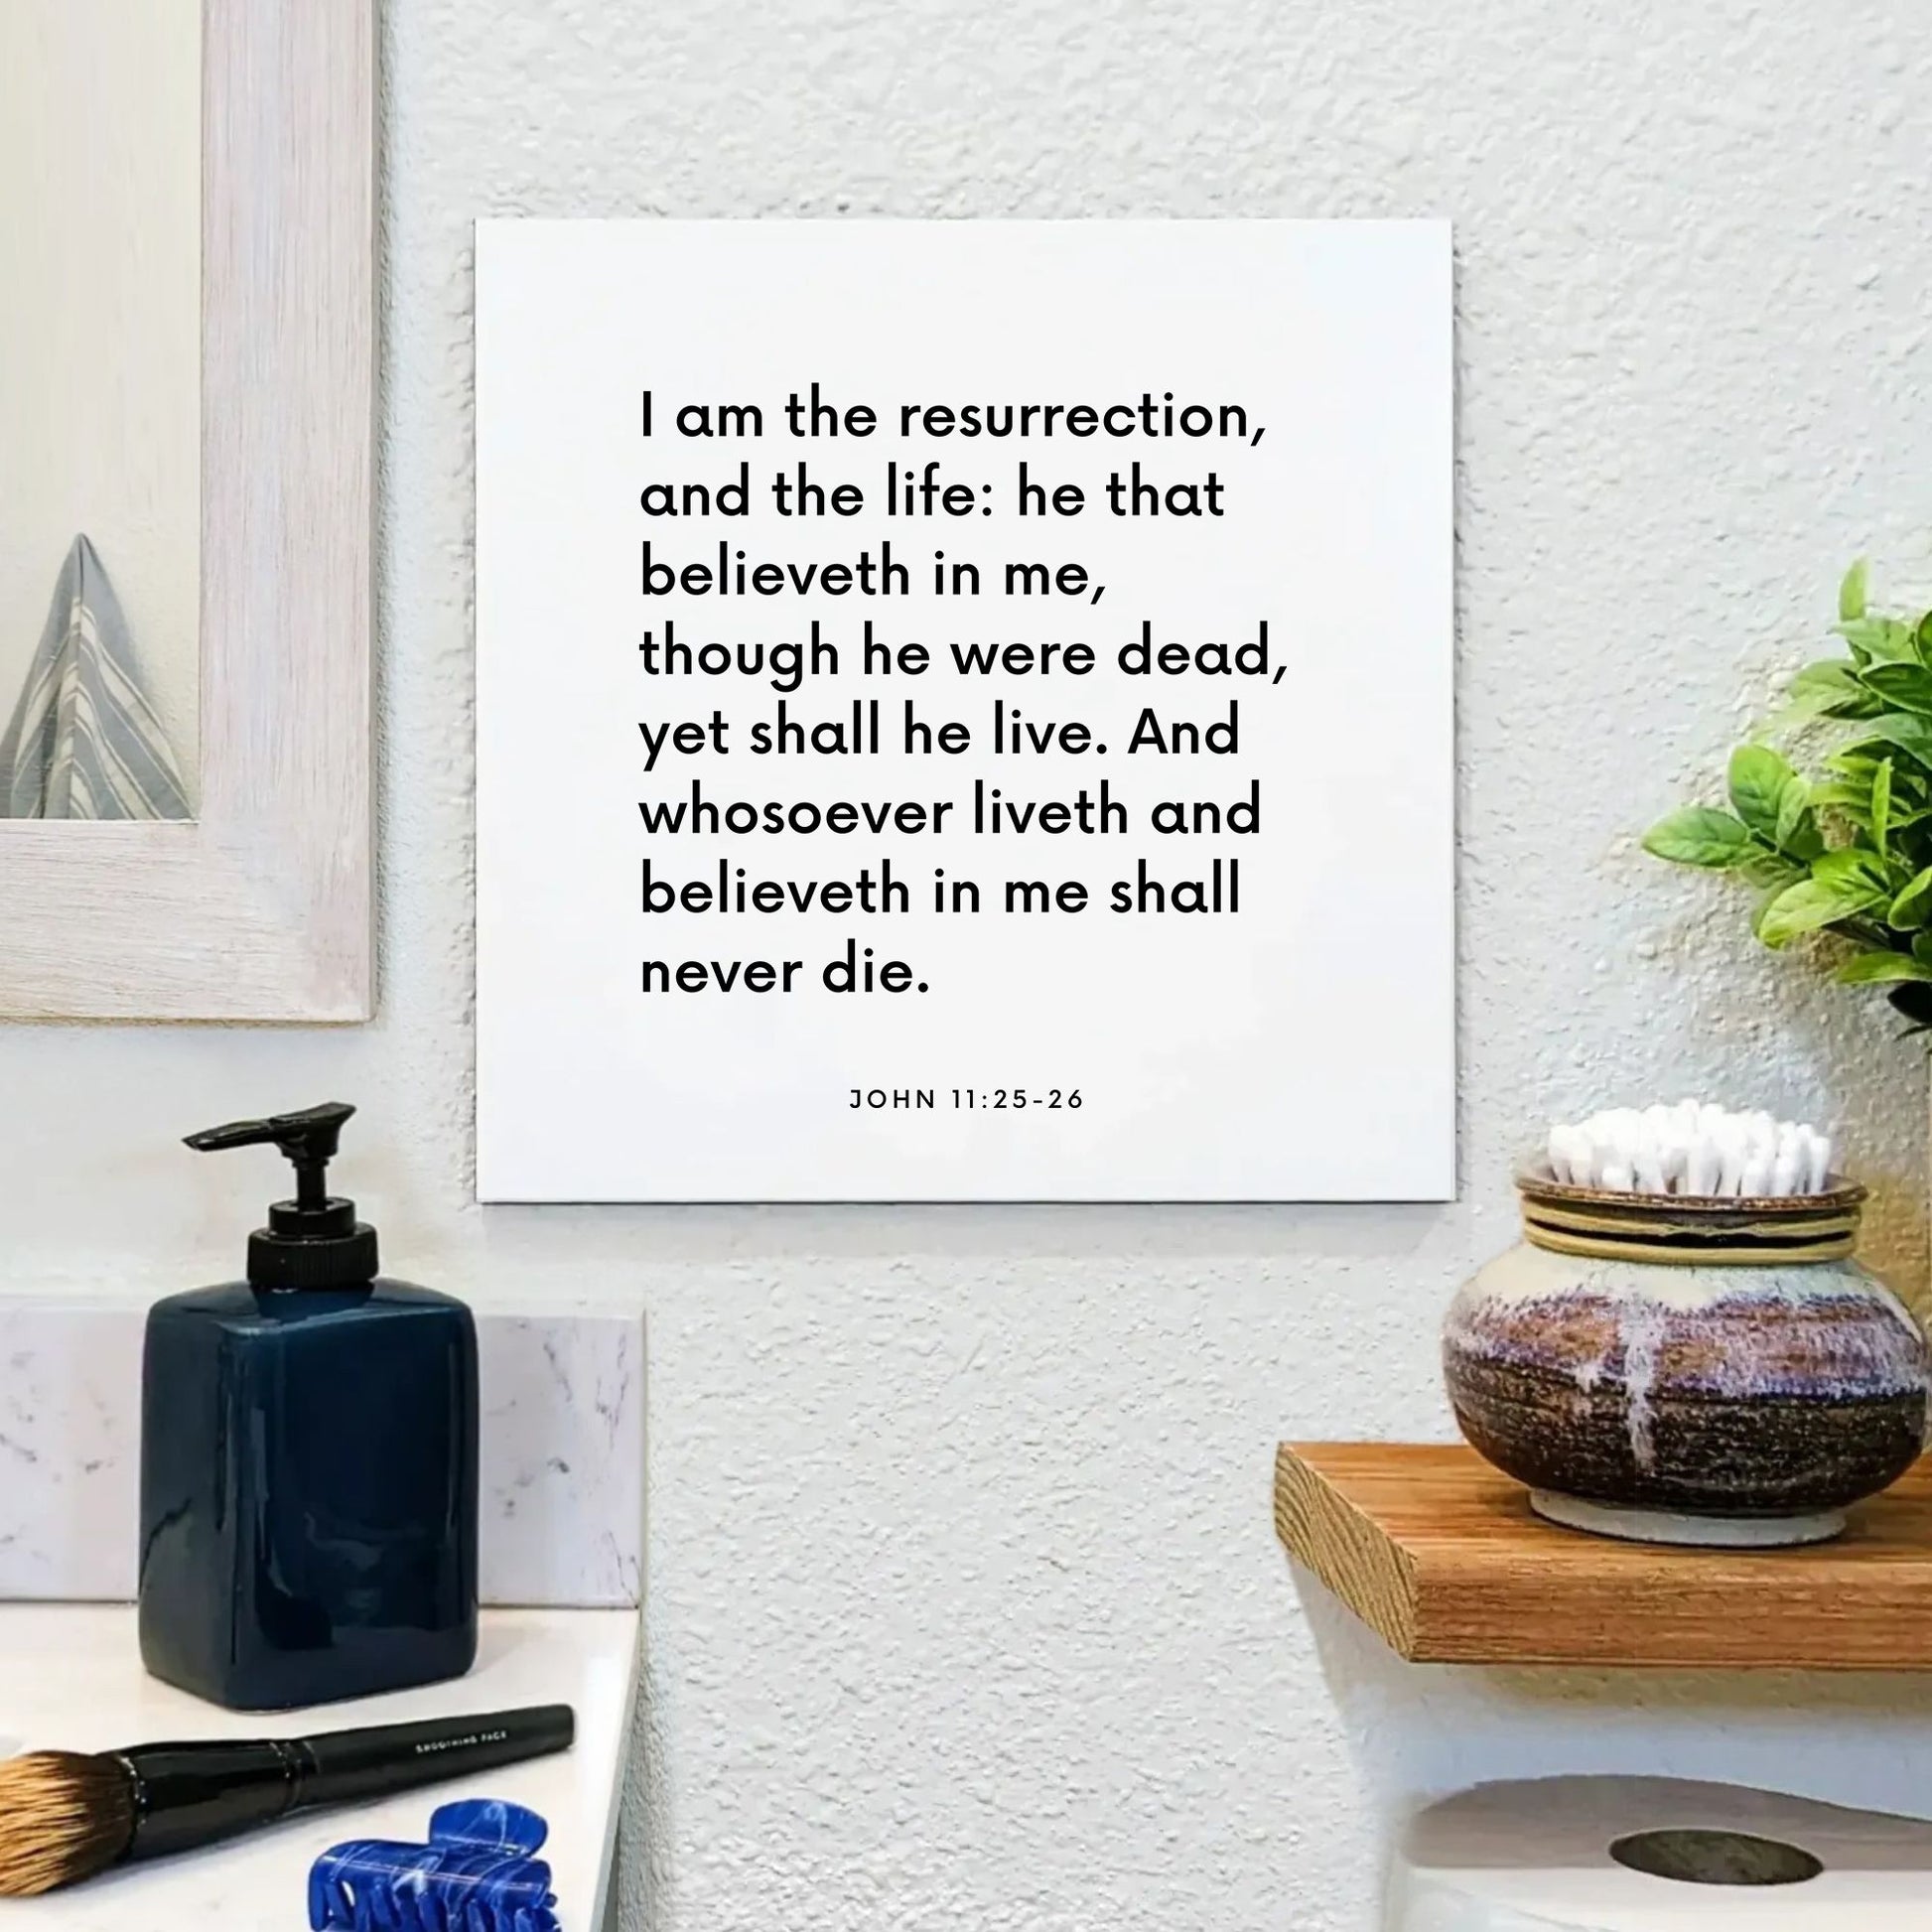 Bathroom mouting of the scripture tile for John 11:25-26 - "I am the resurrection, and the life"